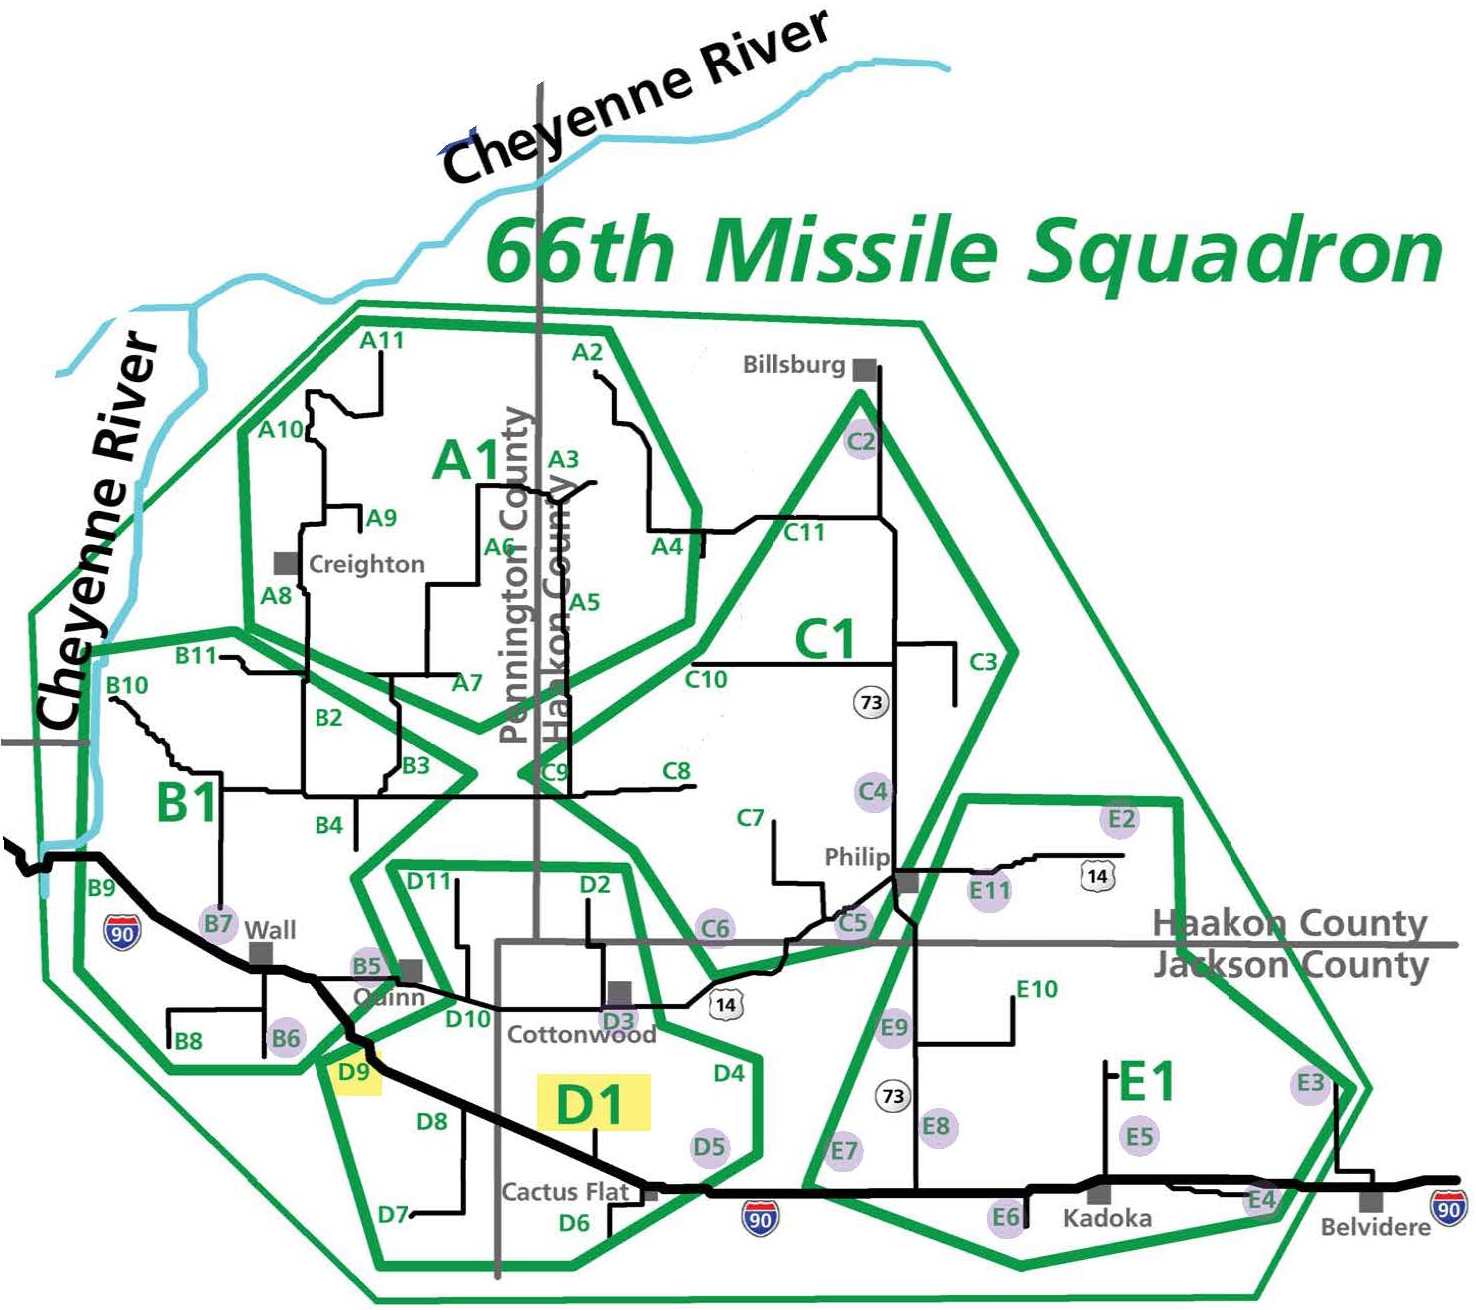 nuclear missile silo locations